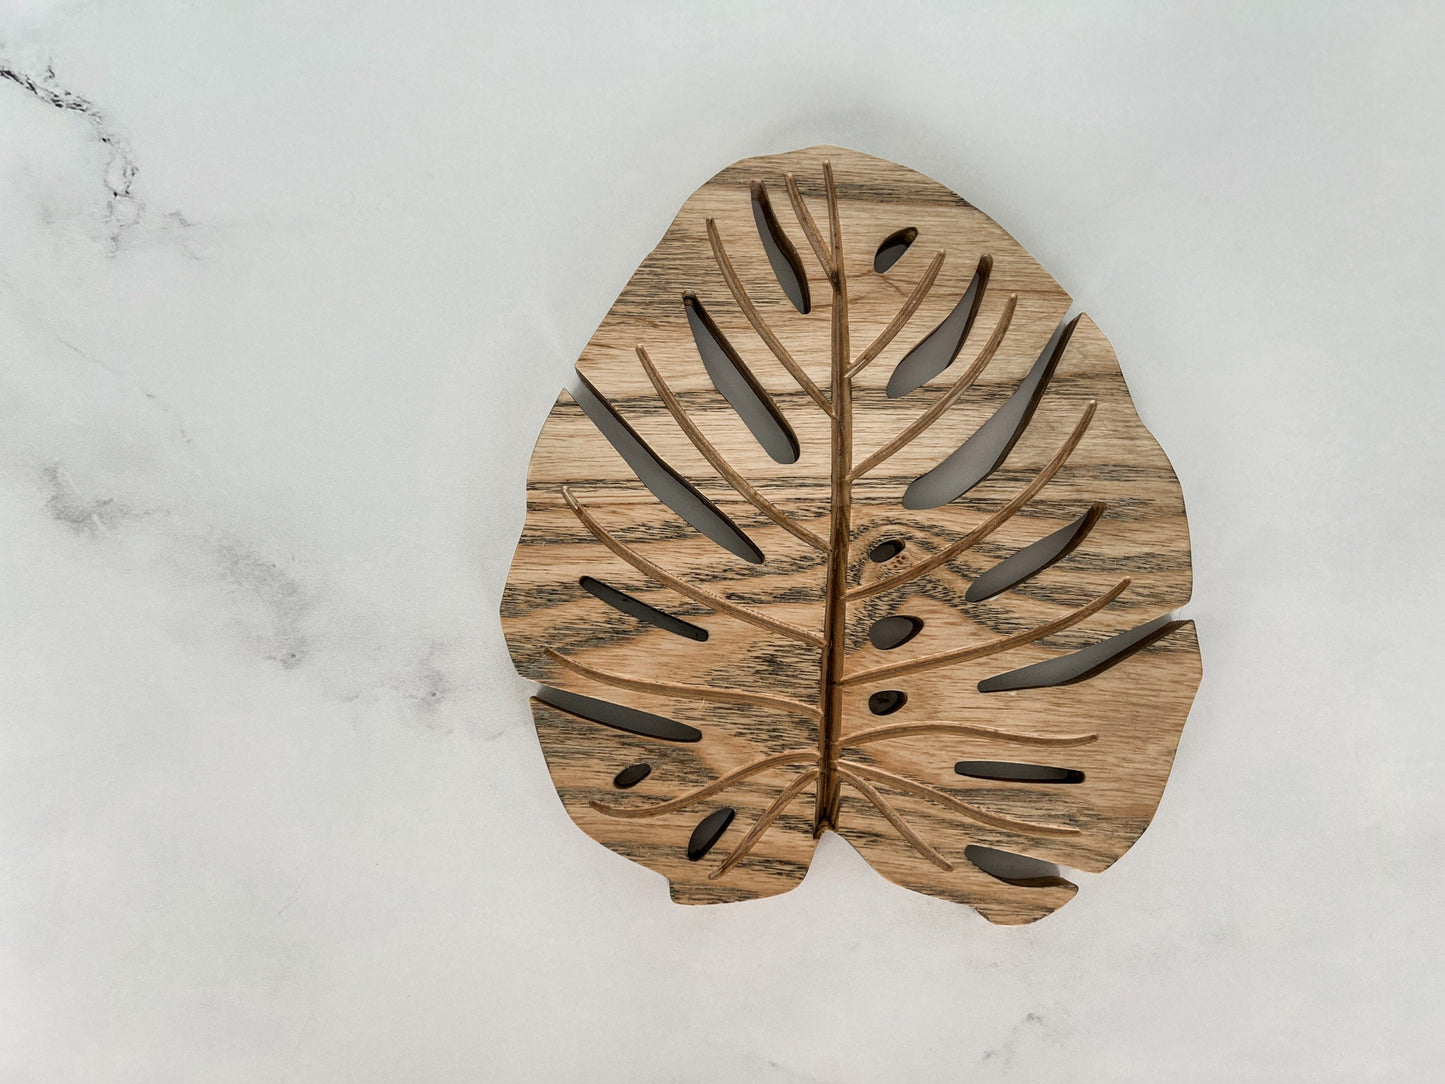 Monstera Leaf Wooden Trivet, Serving Tray, Wood Trivet for Dining Table, Dining Accessories, Wood Gifts, Hot Tray, Pot Holder